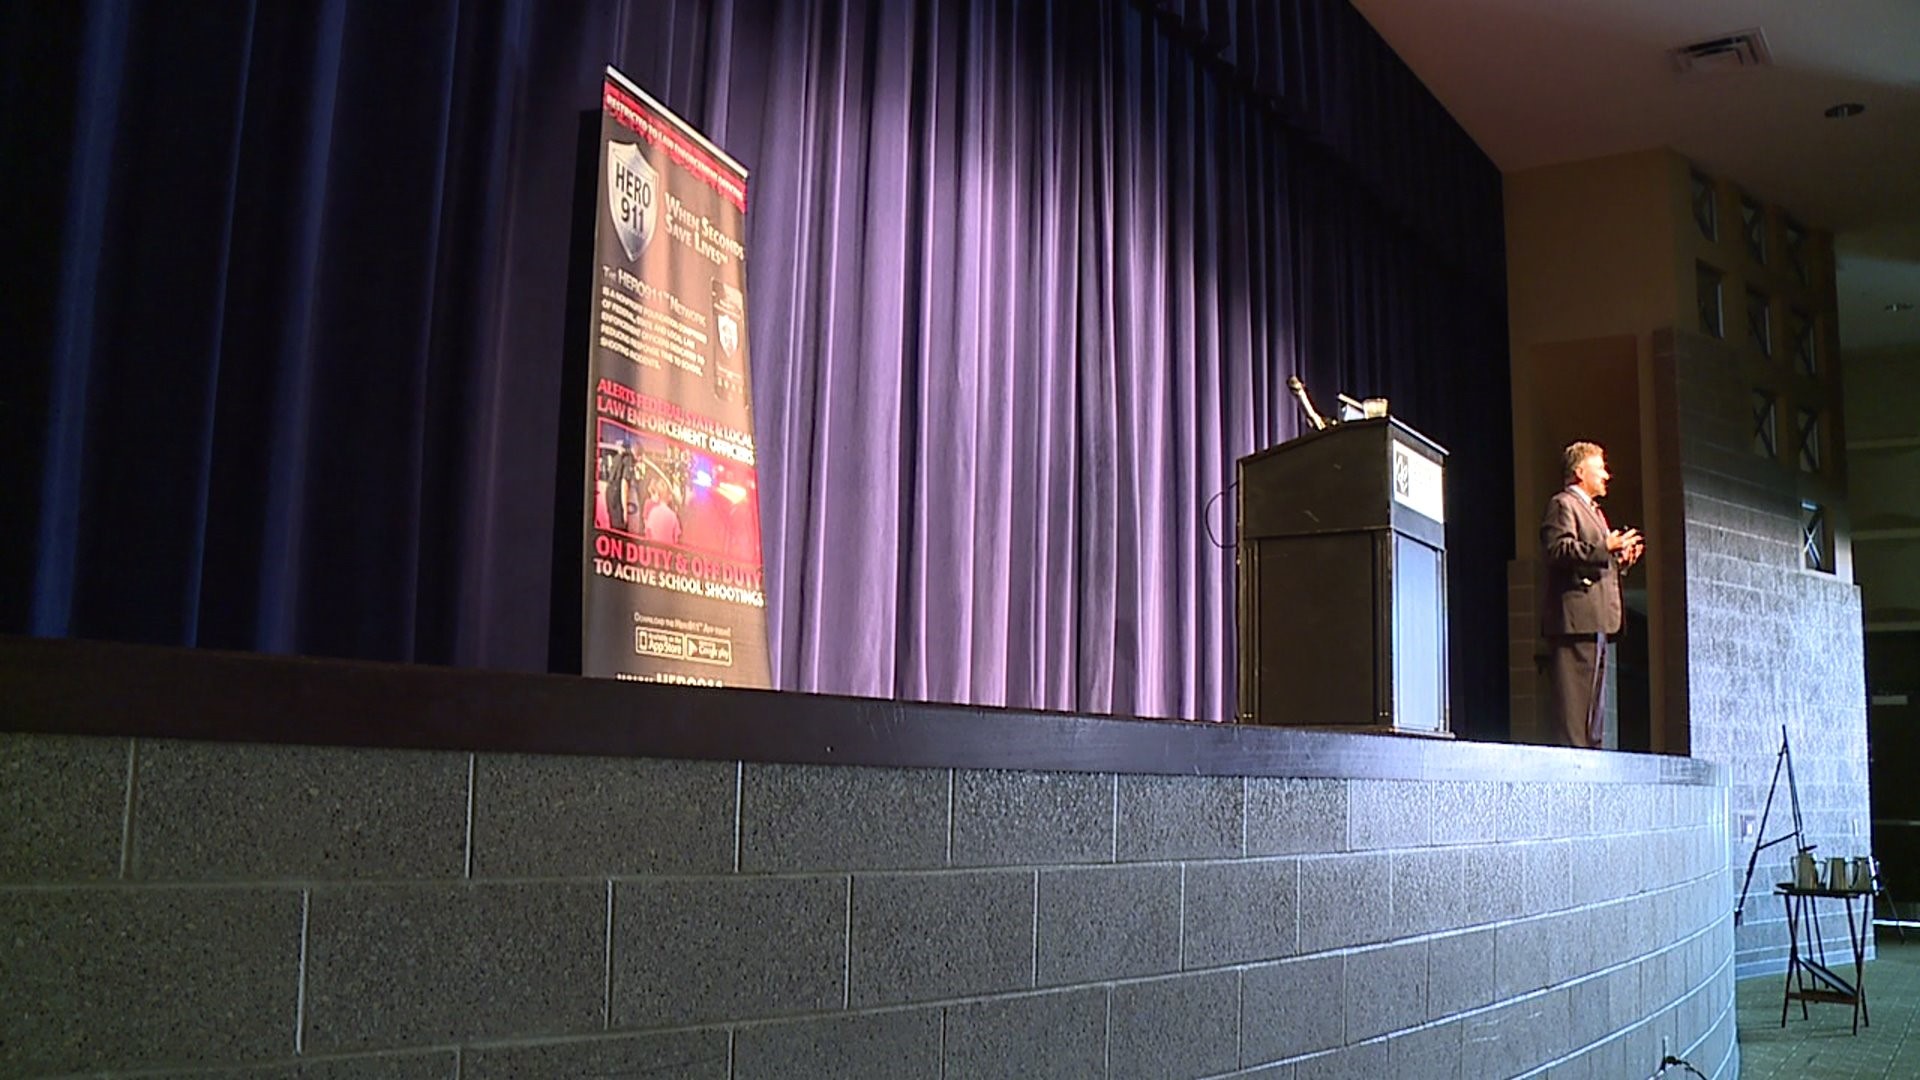 Former Columbine High School Principal speaks at Quad Cities Conference